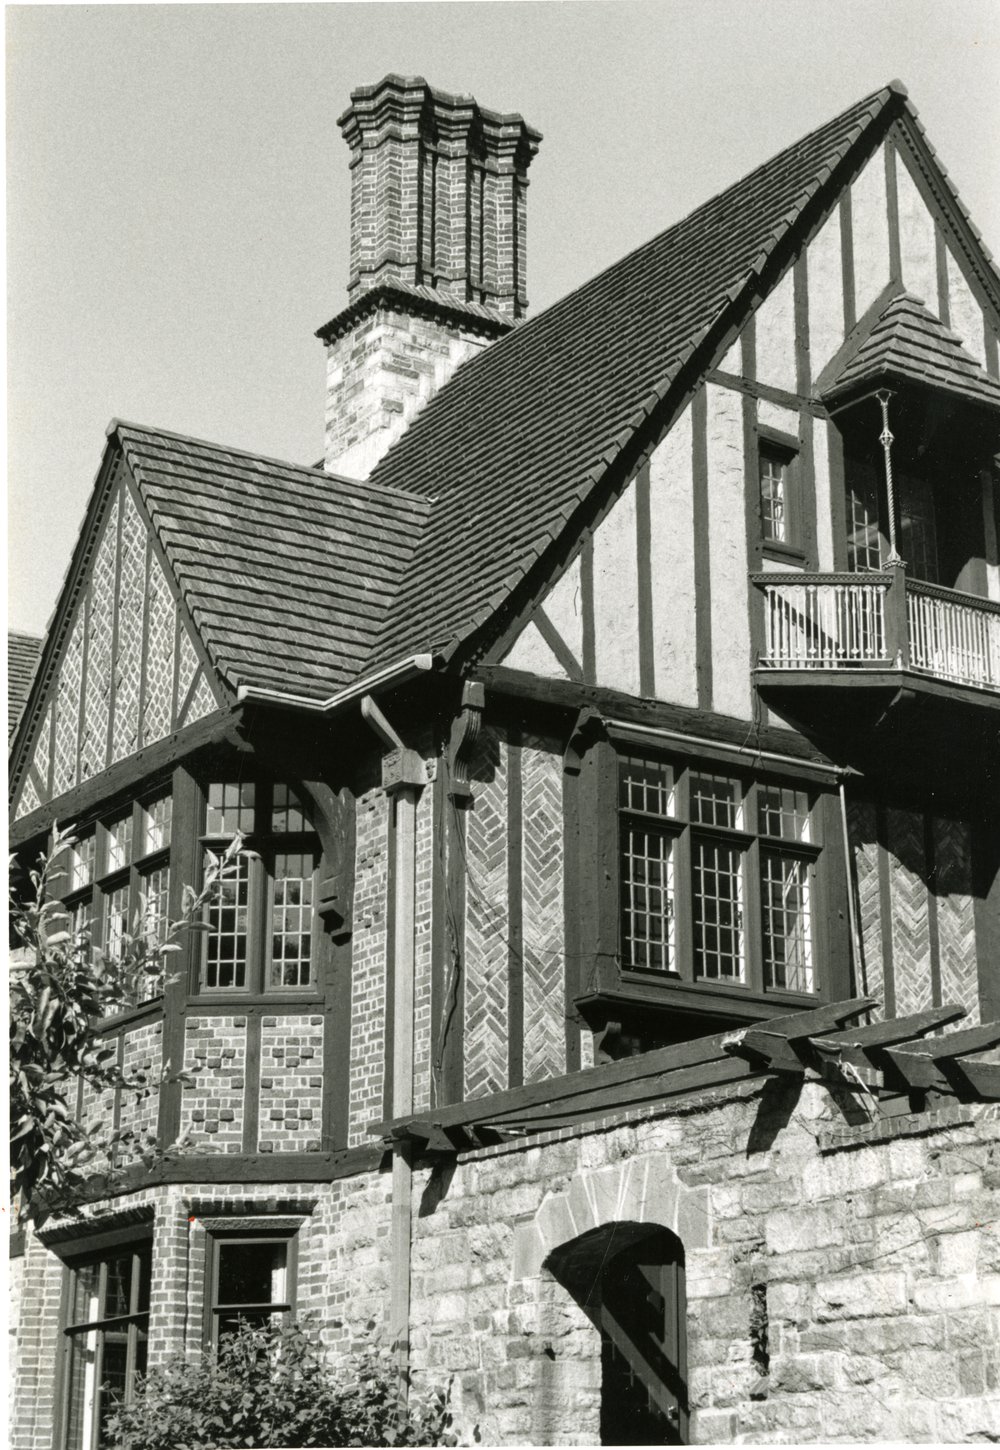 The Higgins House  with its multiplicity of materials, half-timbered gables, and one of its five ornamental brick chimneys on display